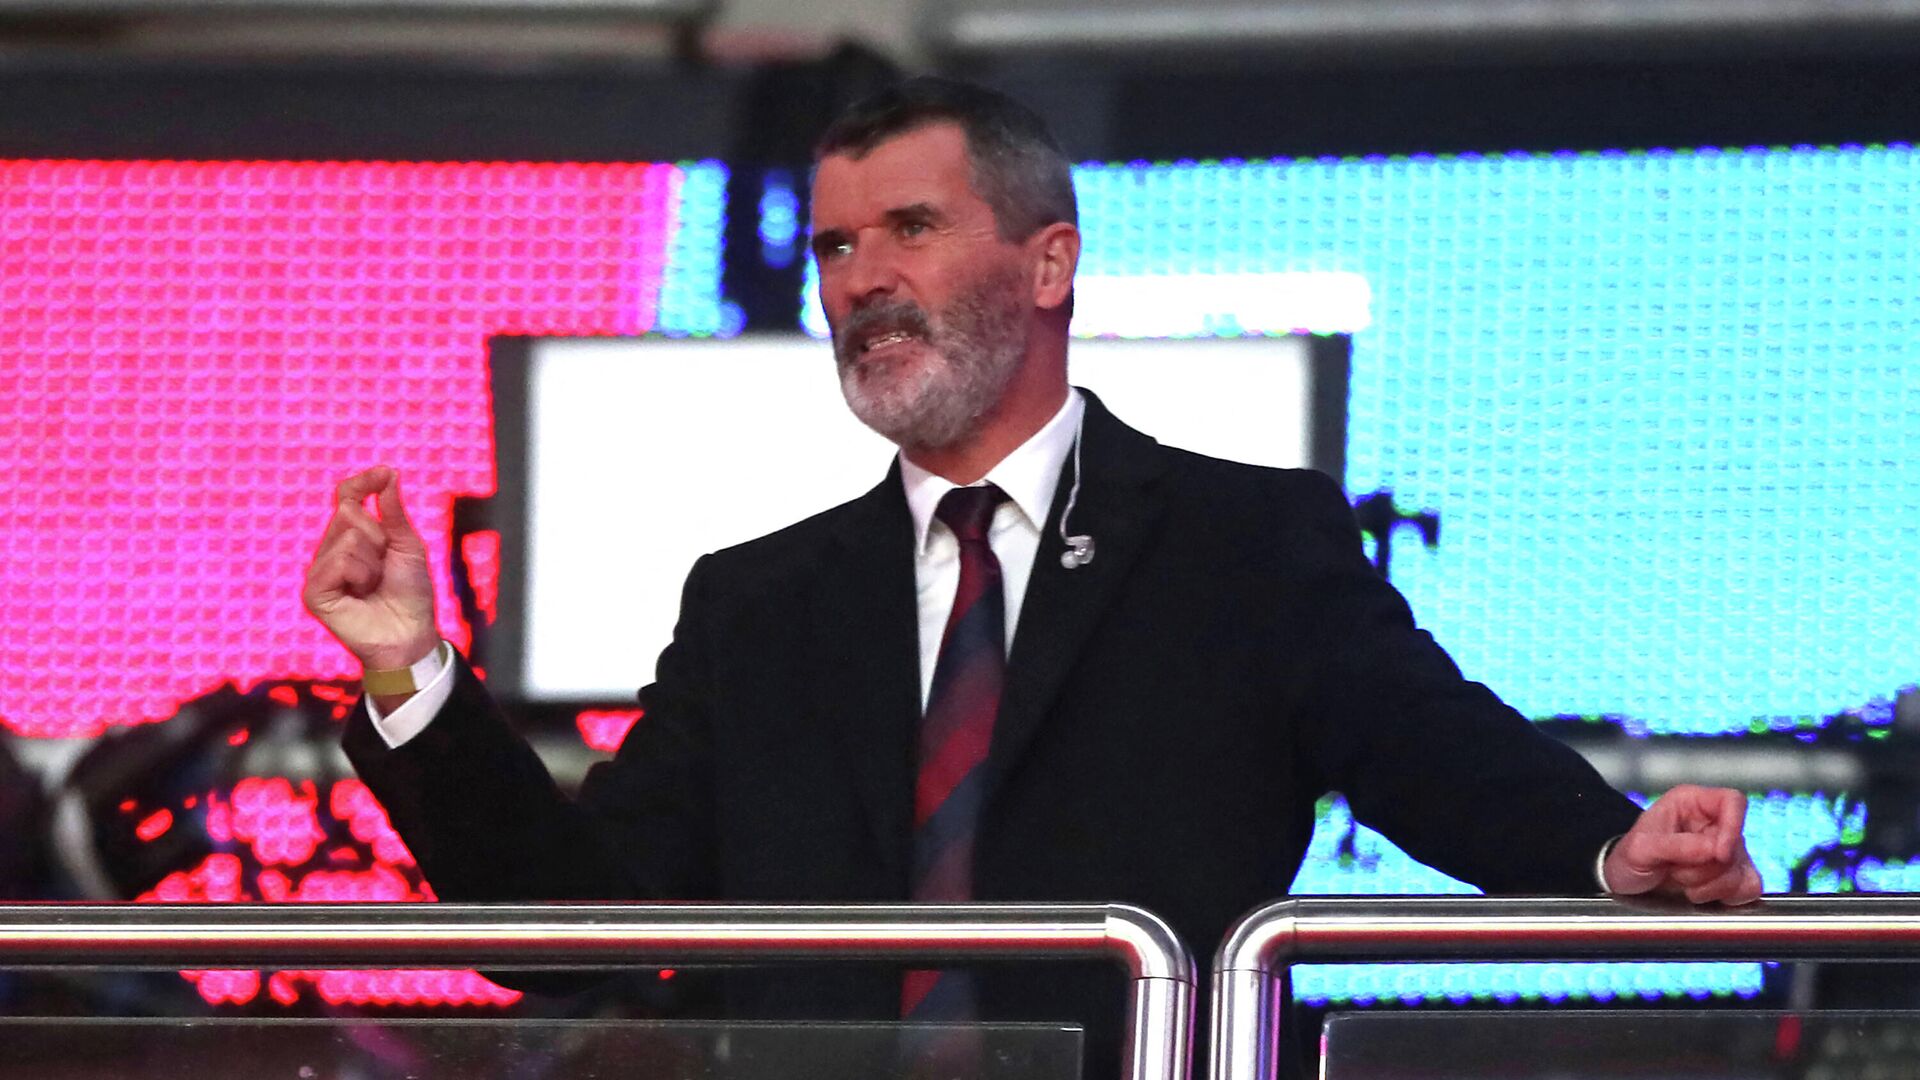 Former Ireland player Roy Keane, working for television, looks on during the international friendly football match between England and Republic of Ireland at Wembley stadium in north London on November 12, 2020 - Sputnik International, 1920, 03.03.2022